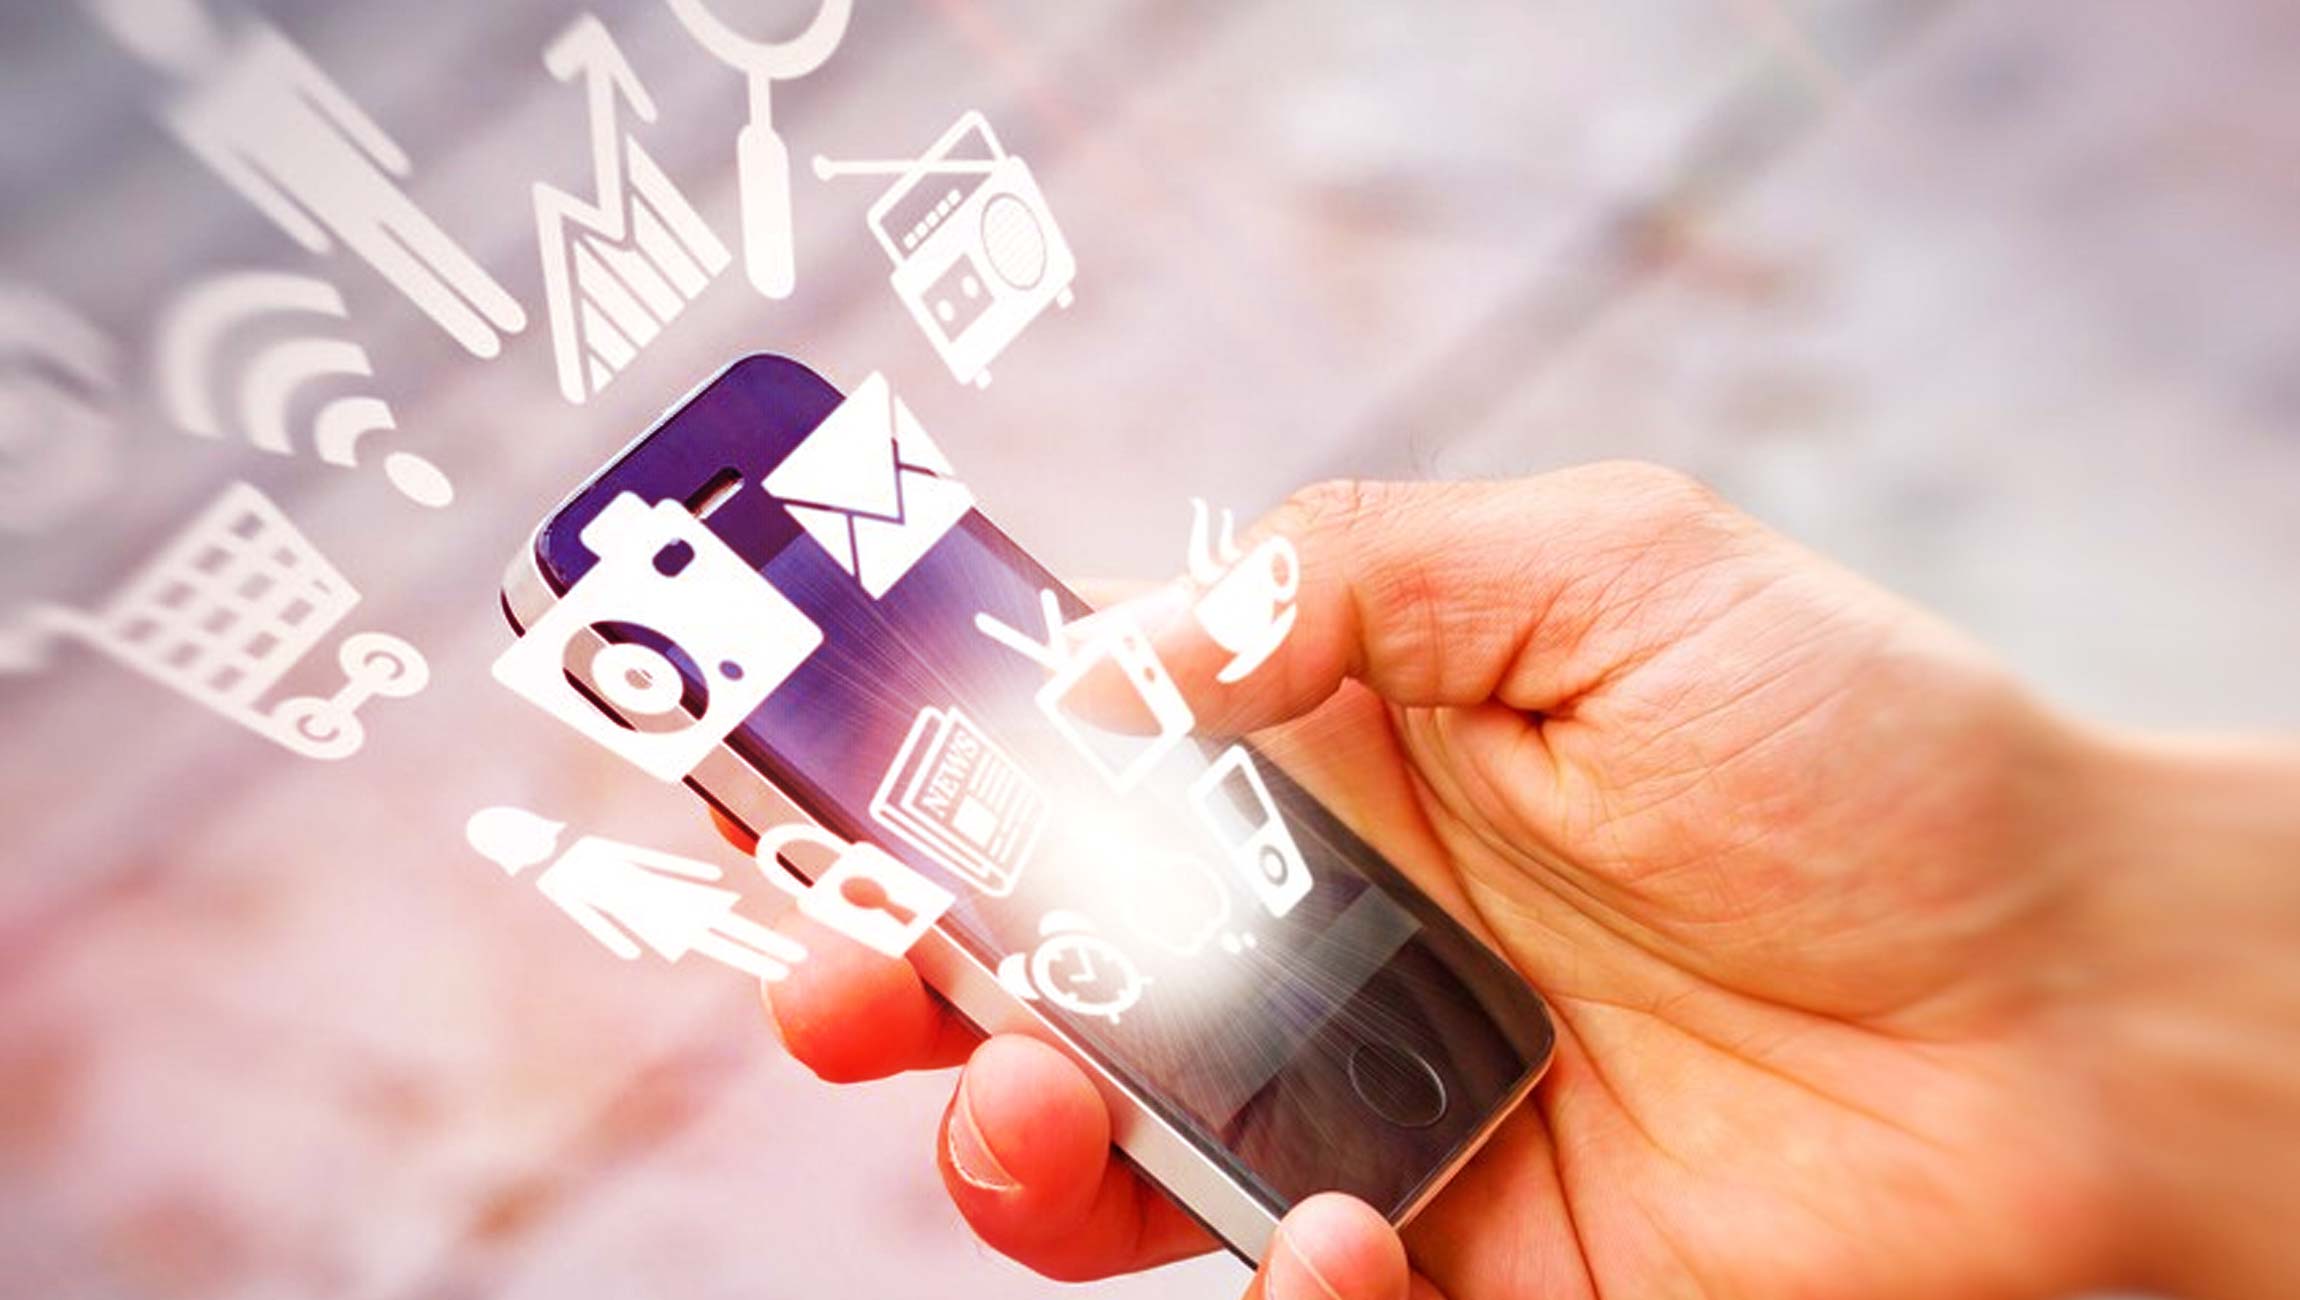 Is SMS Marketing Extinct? According to new research not yet